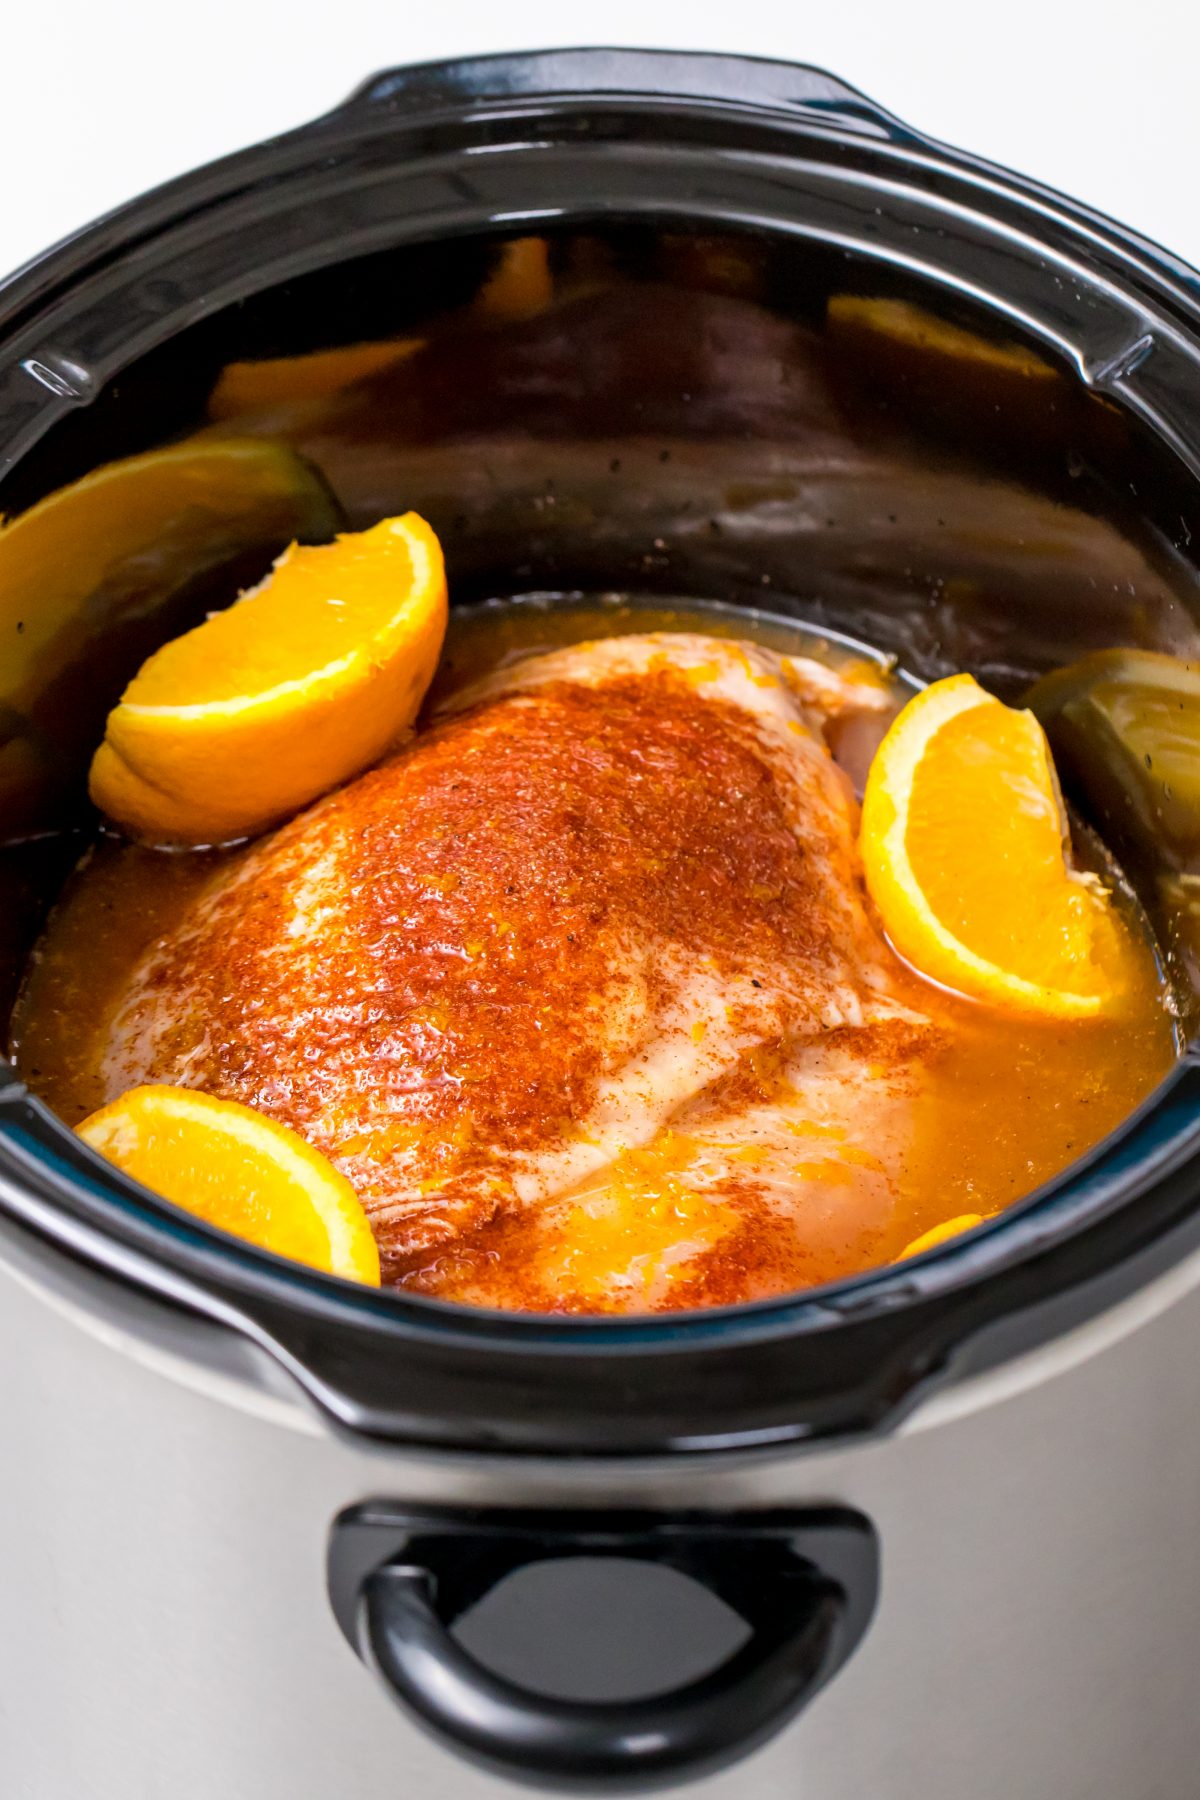 Cook the turkey in the slow-cooker